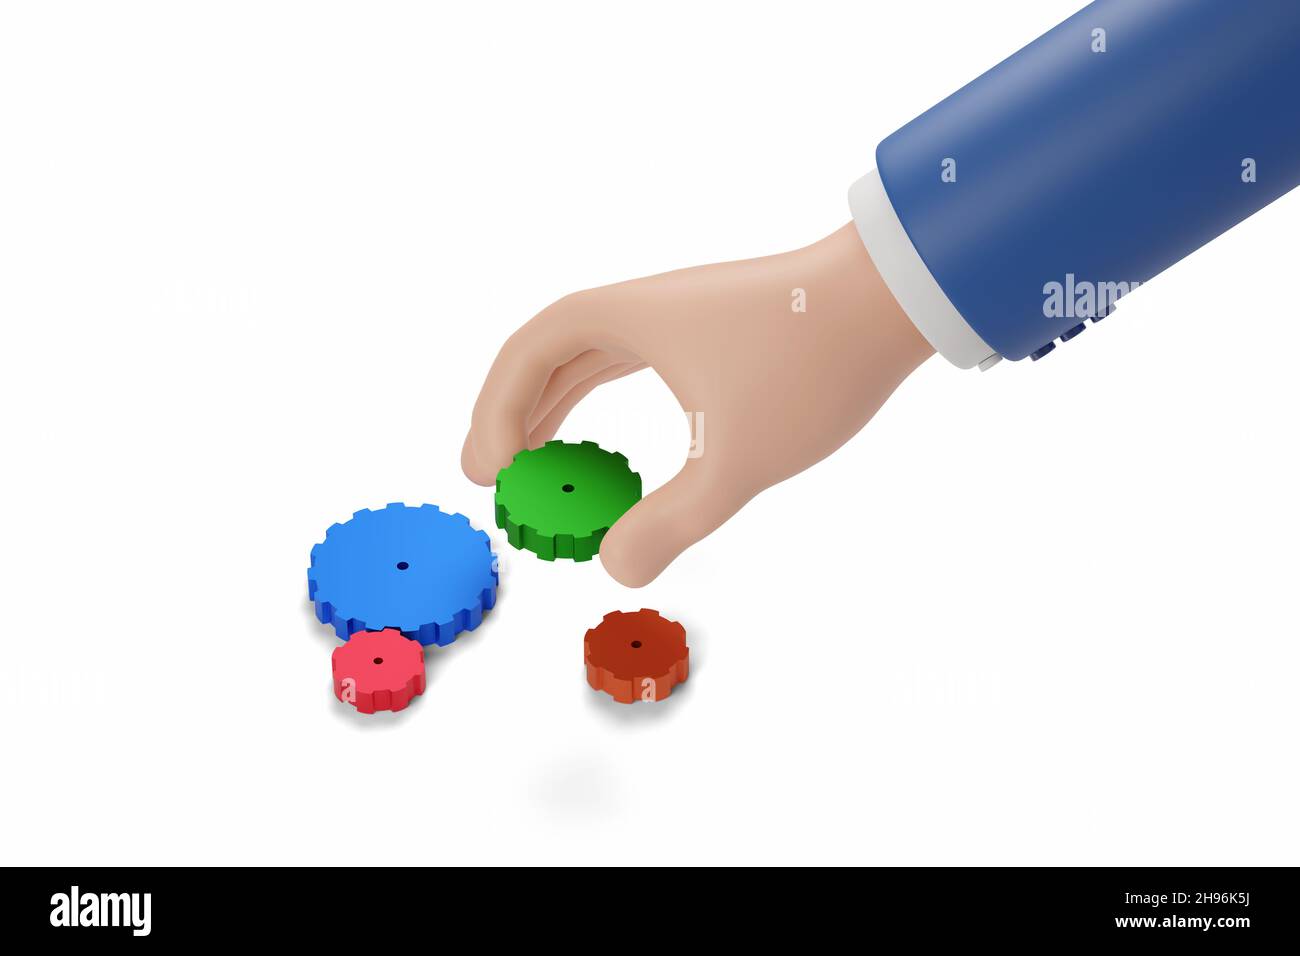 Cartoon hand putting a gear in its place. Coaching concept. 3d illustration. Stock Photo